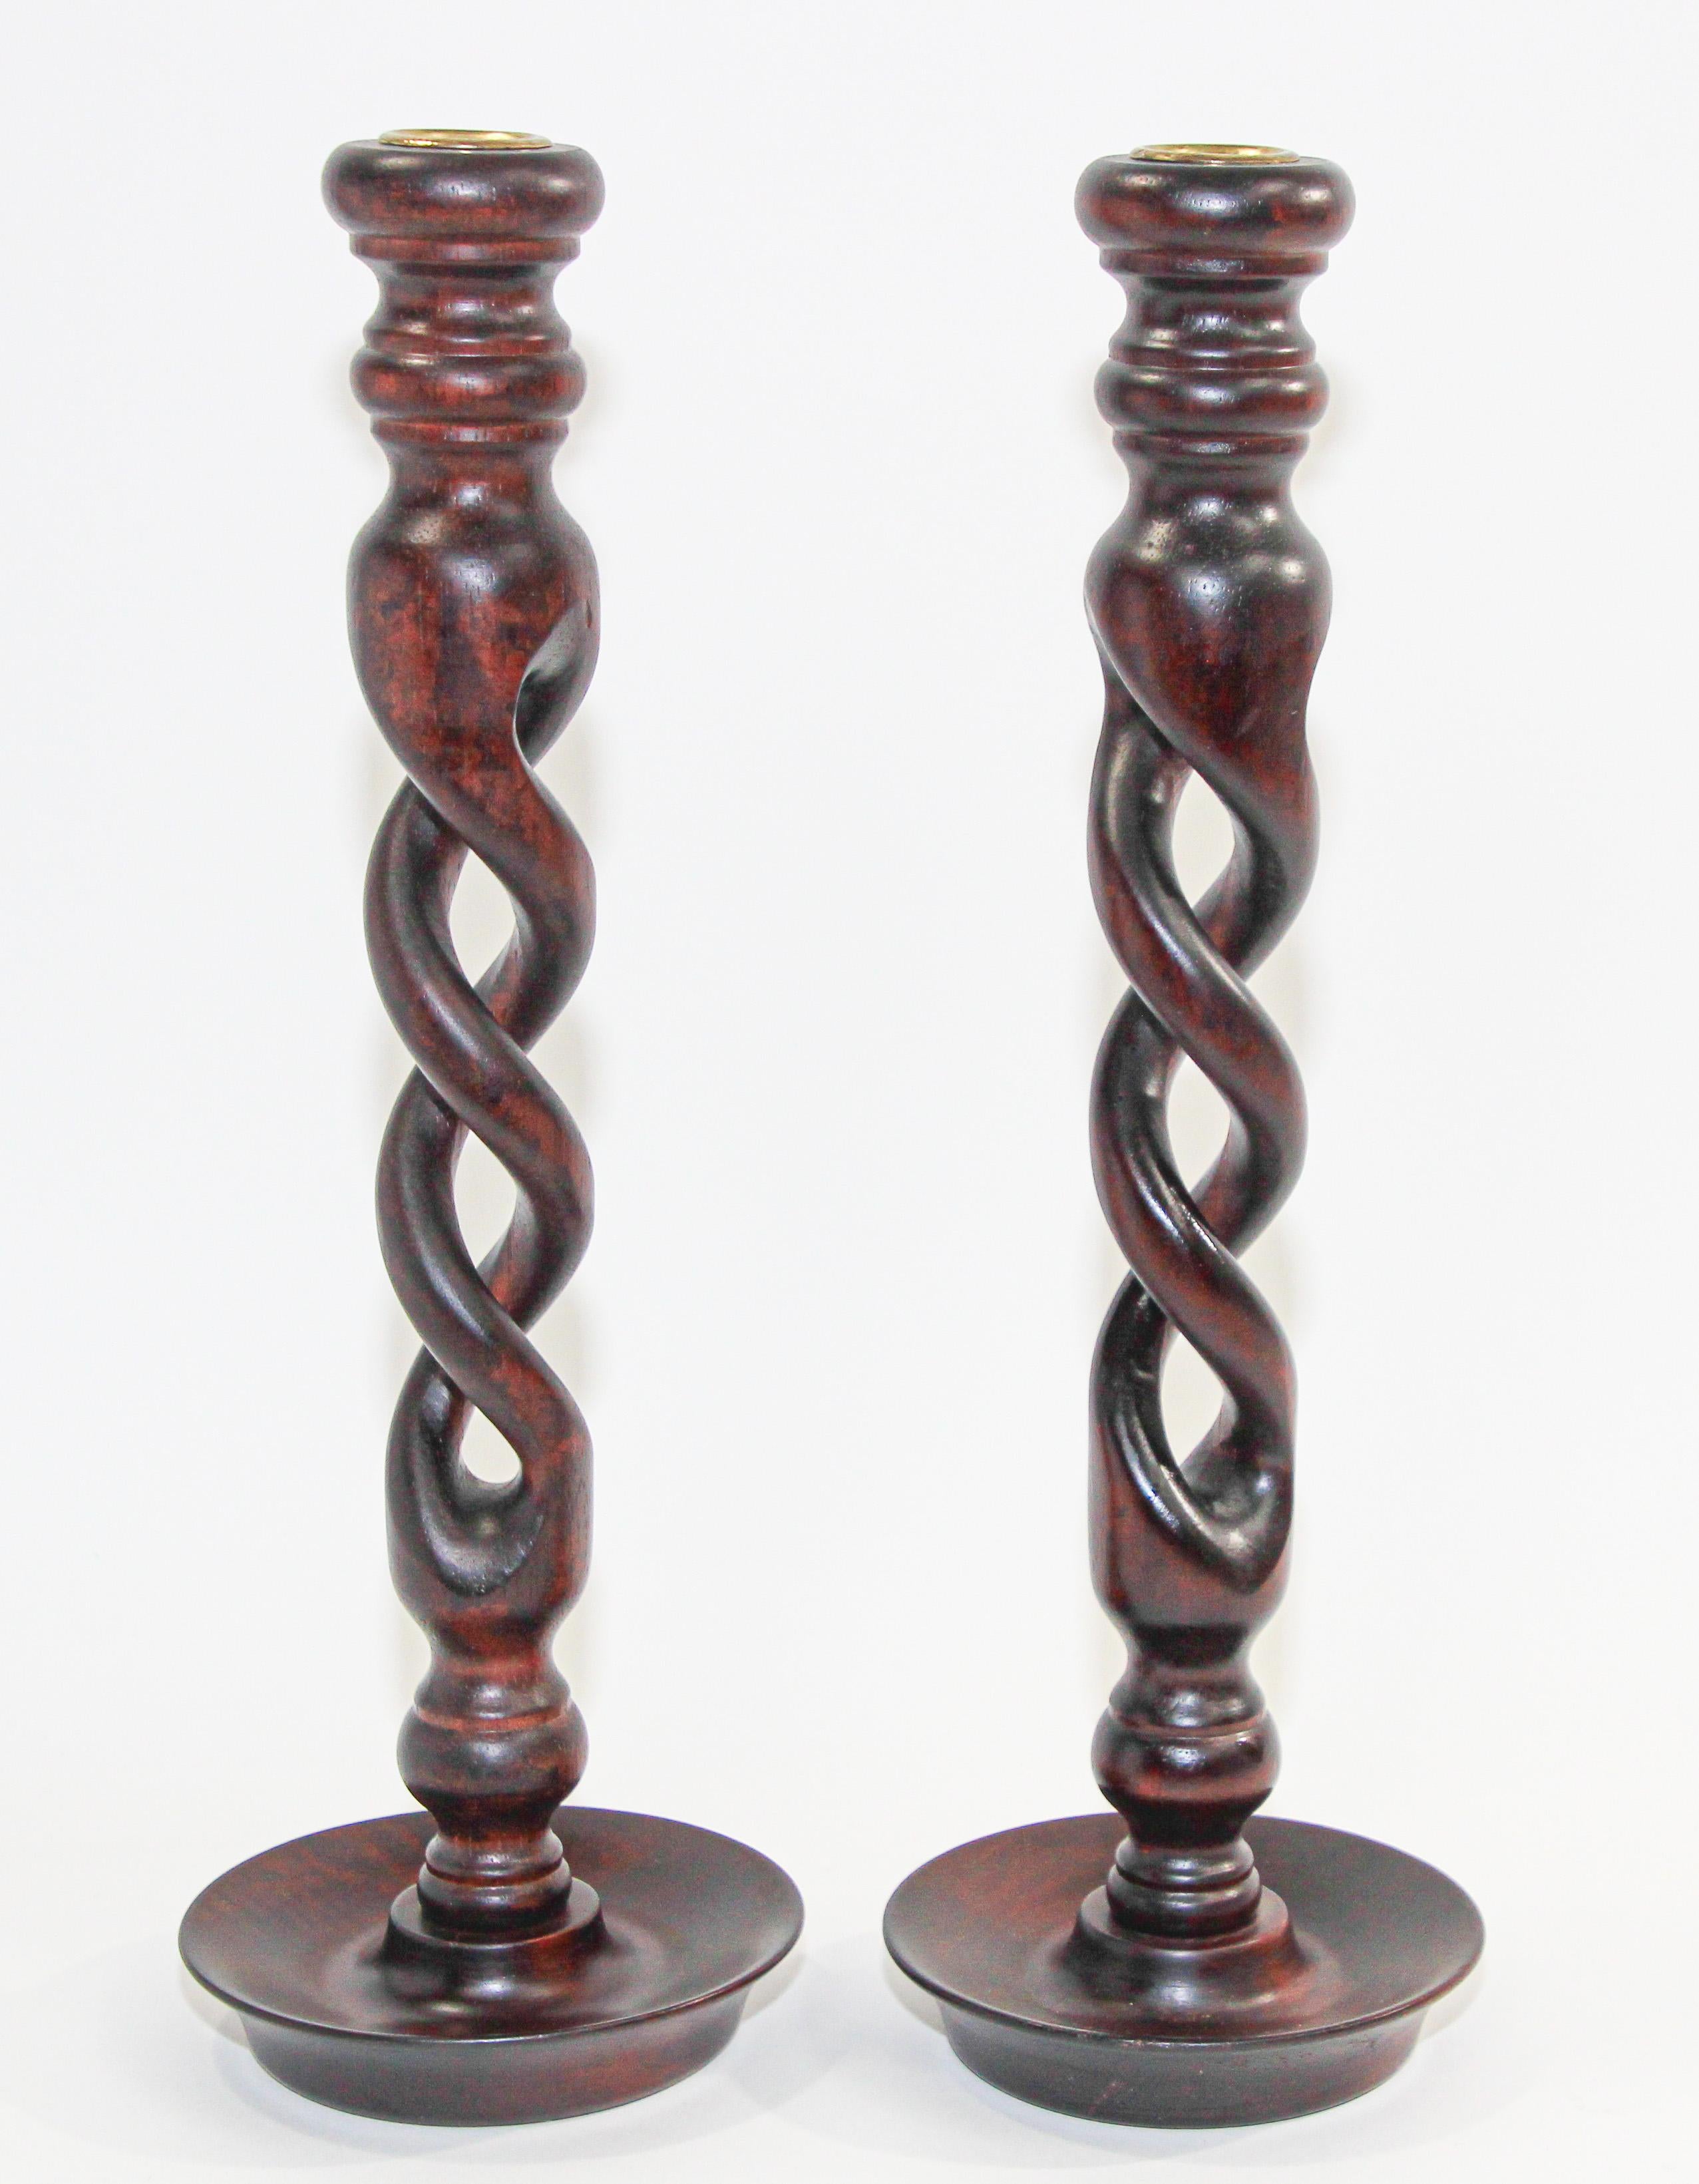 Elegant Victorian pair of barley twist wooden candlesticks on round base.
English oak open barley twist wooden candlesticks topped with brass candleholders.
A rare and sought after model with open twisted wood work.
Hand carved open barley twist